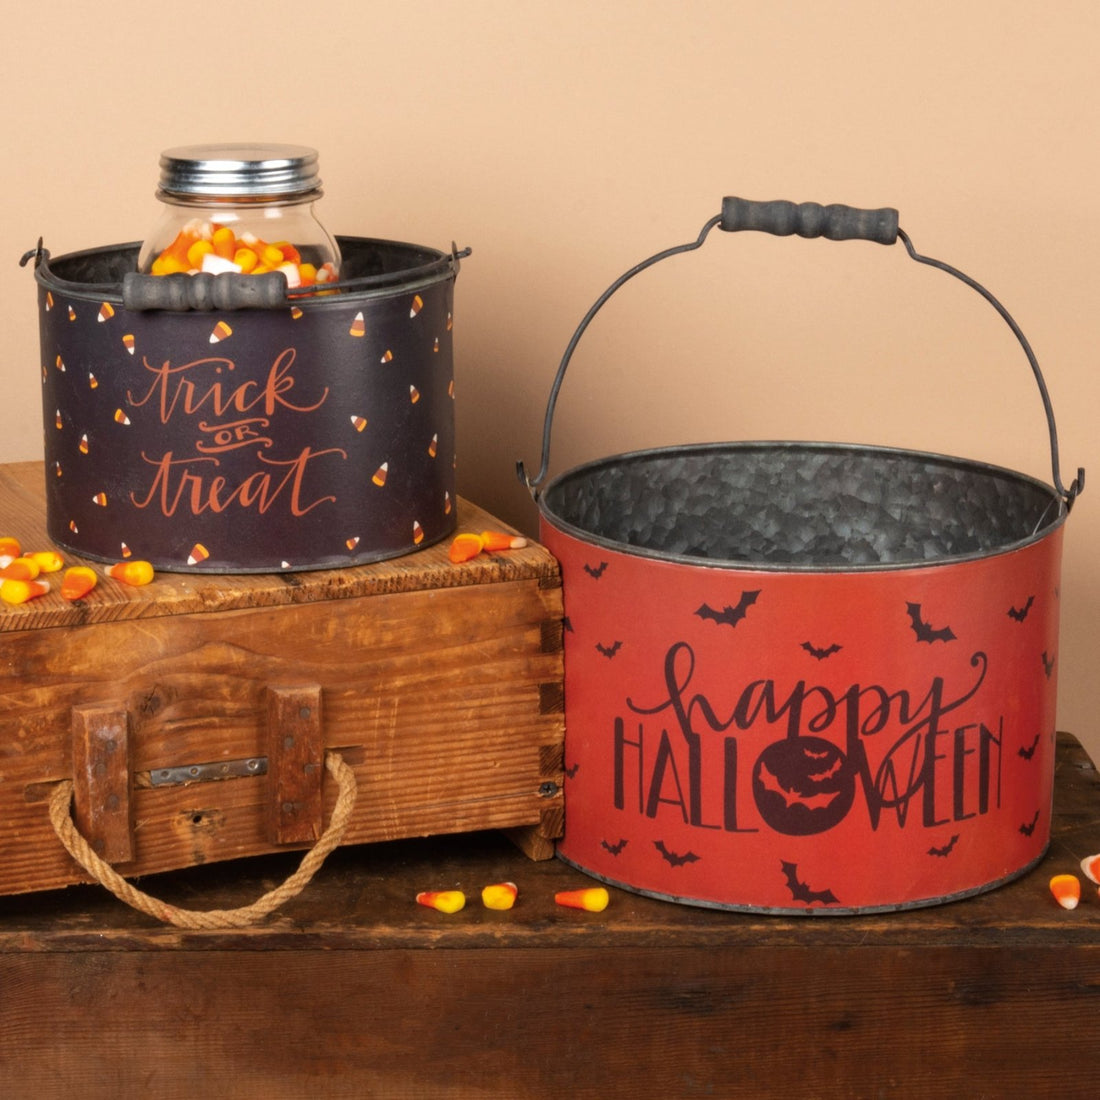 Retro Look Halloween Metal Buckets w/ Handle 2pc Trick or Treat - The Primitive Pineapple Collection